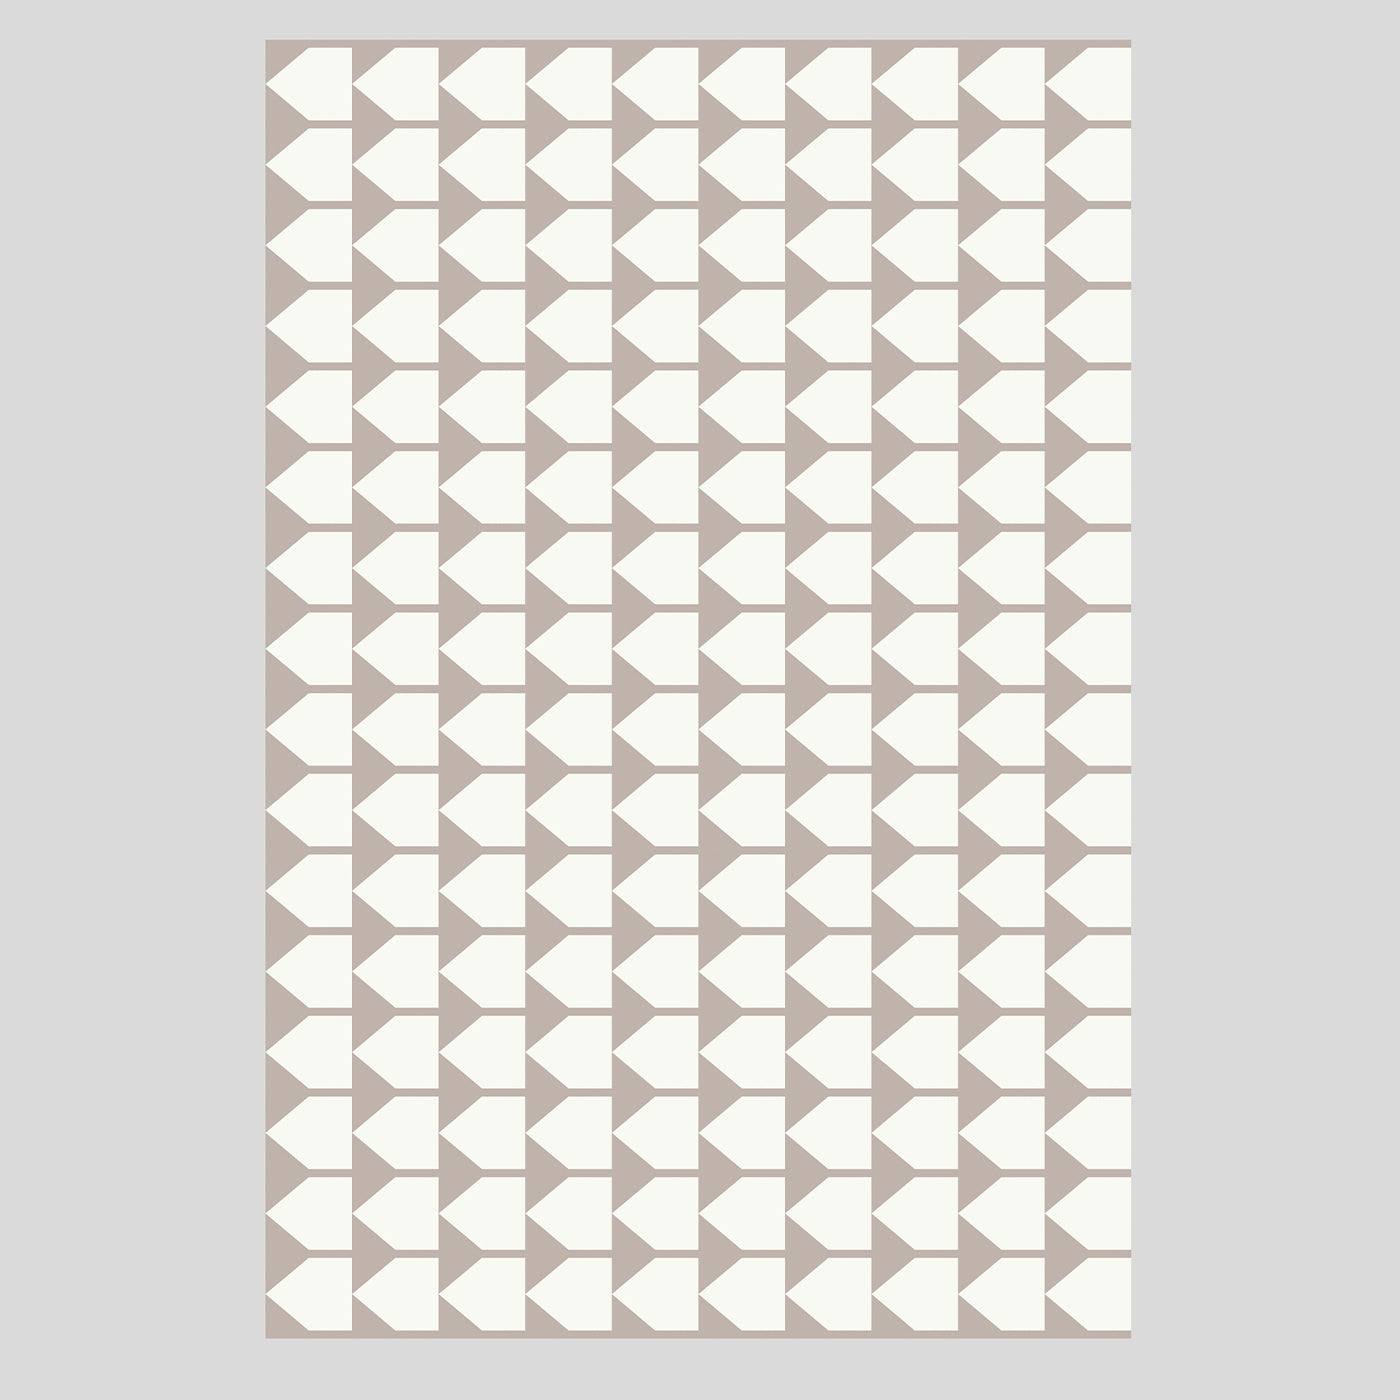 Archetipo Taupe/White Blanket by Makeyourhome + Walter Terruso - Alternative view 3